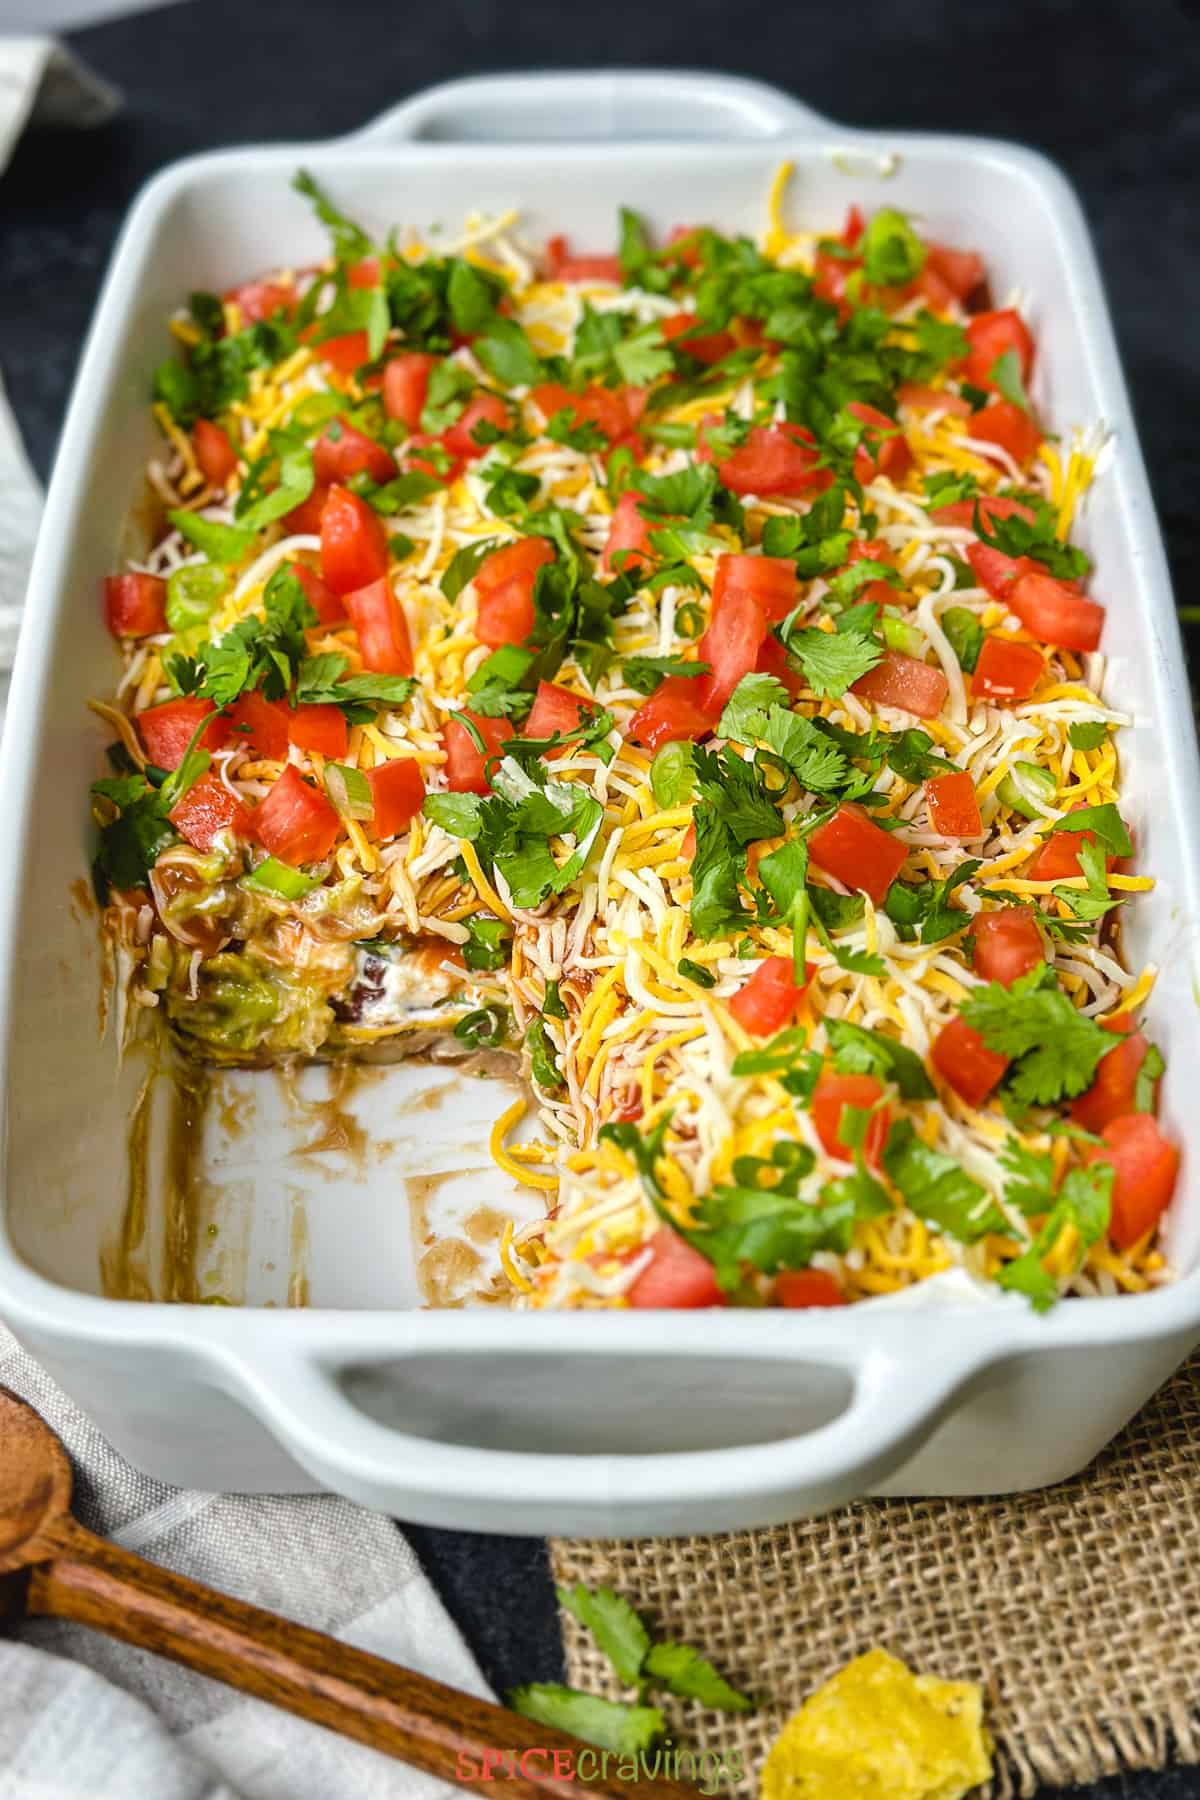 Layered dip in pan showing layers of the dip including beans, guacamole, sour cream and tomato